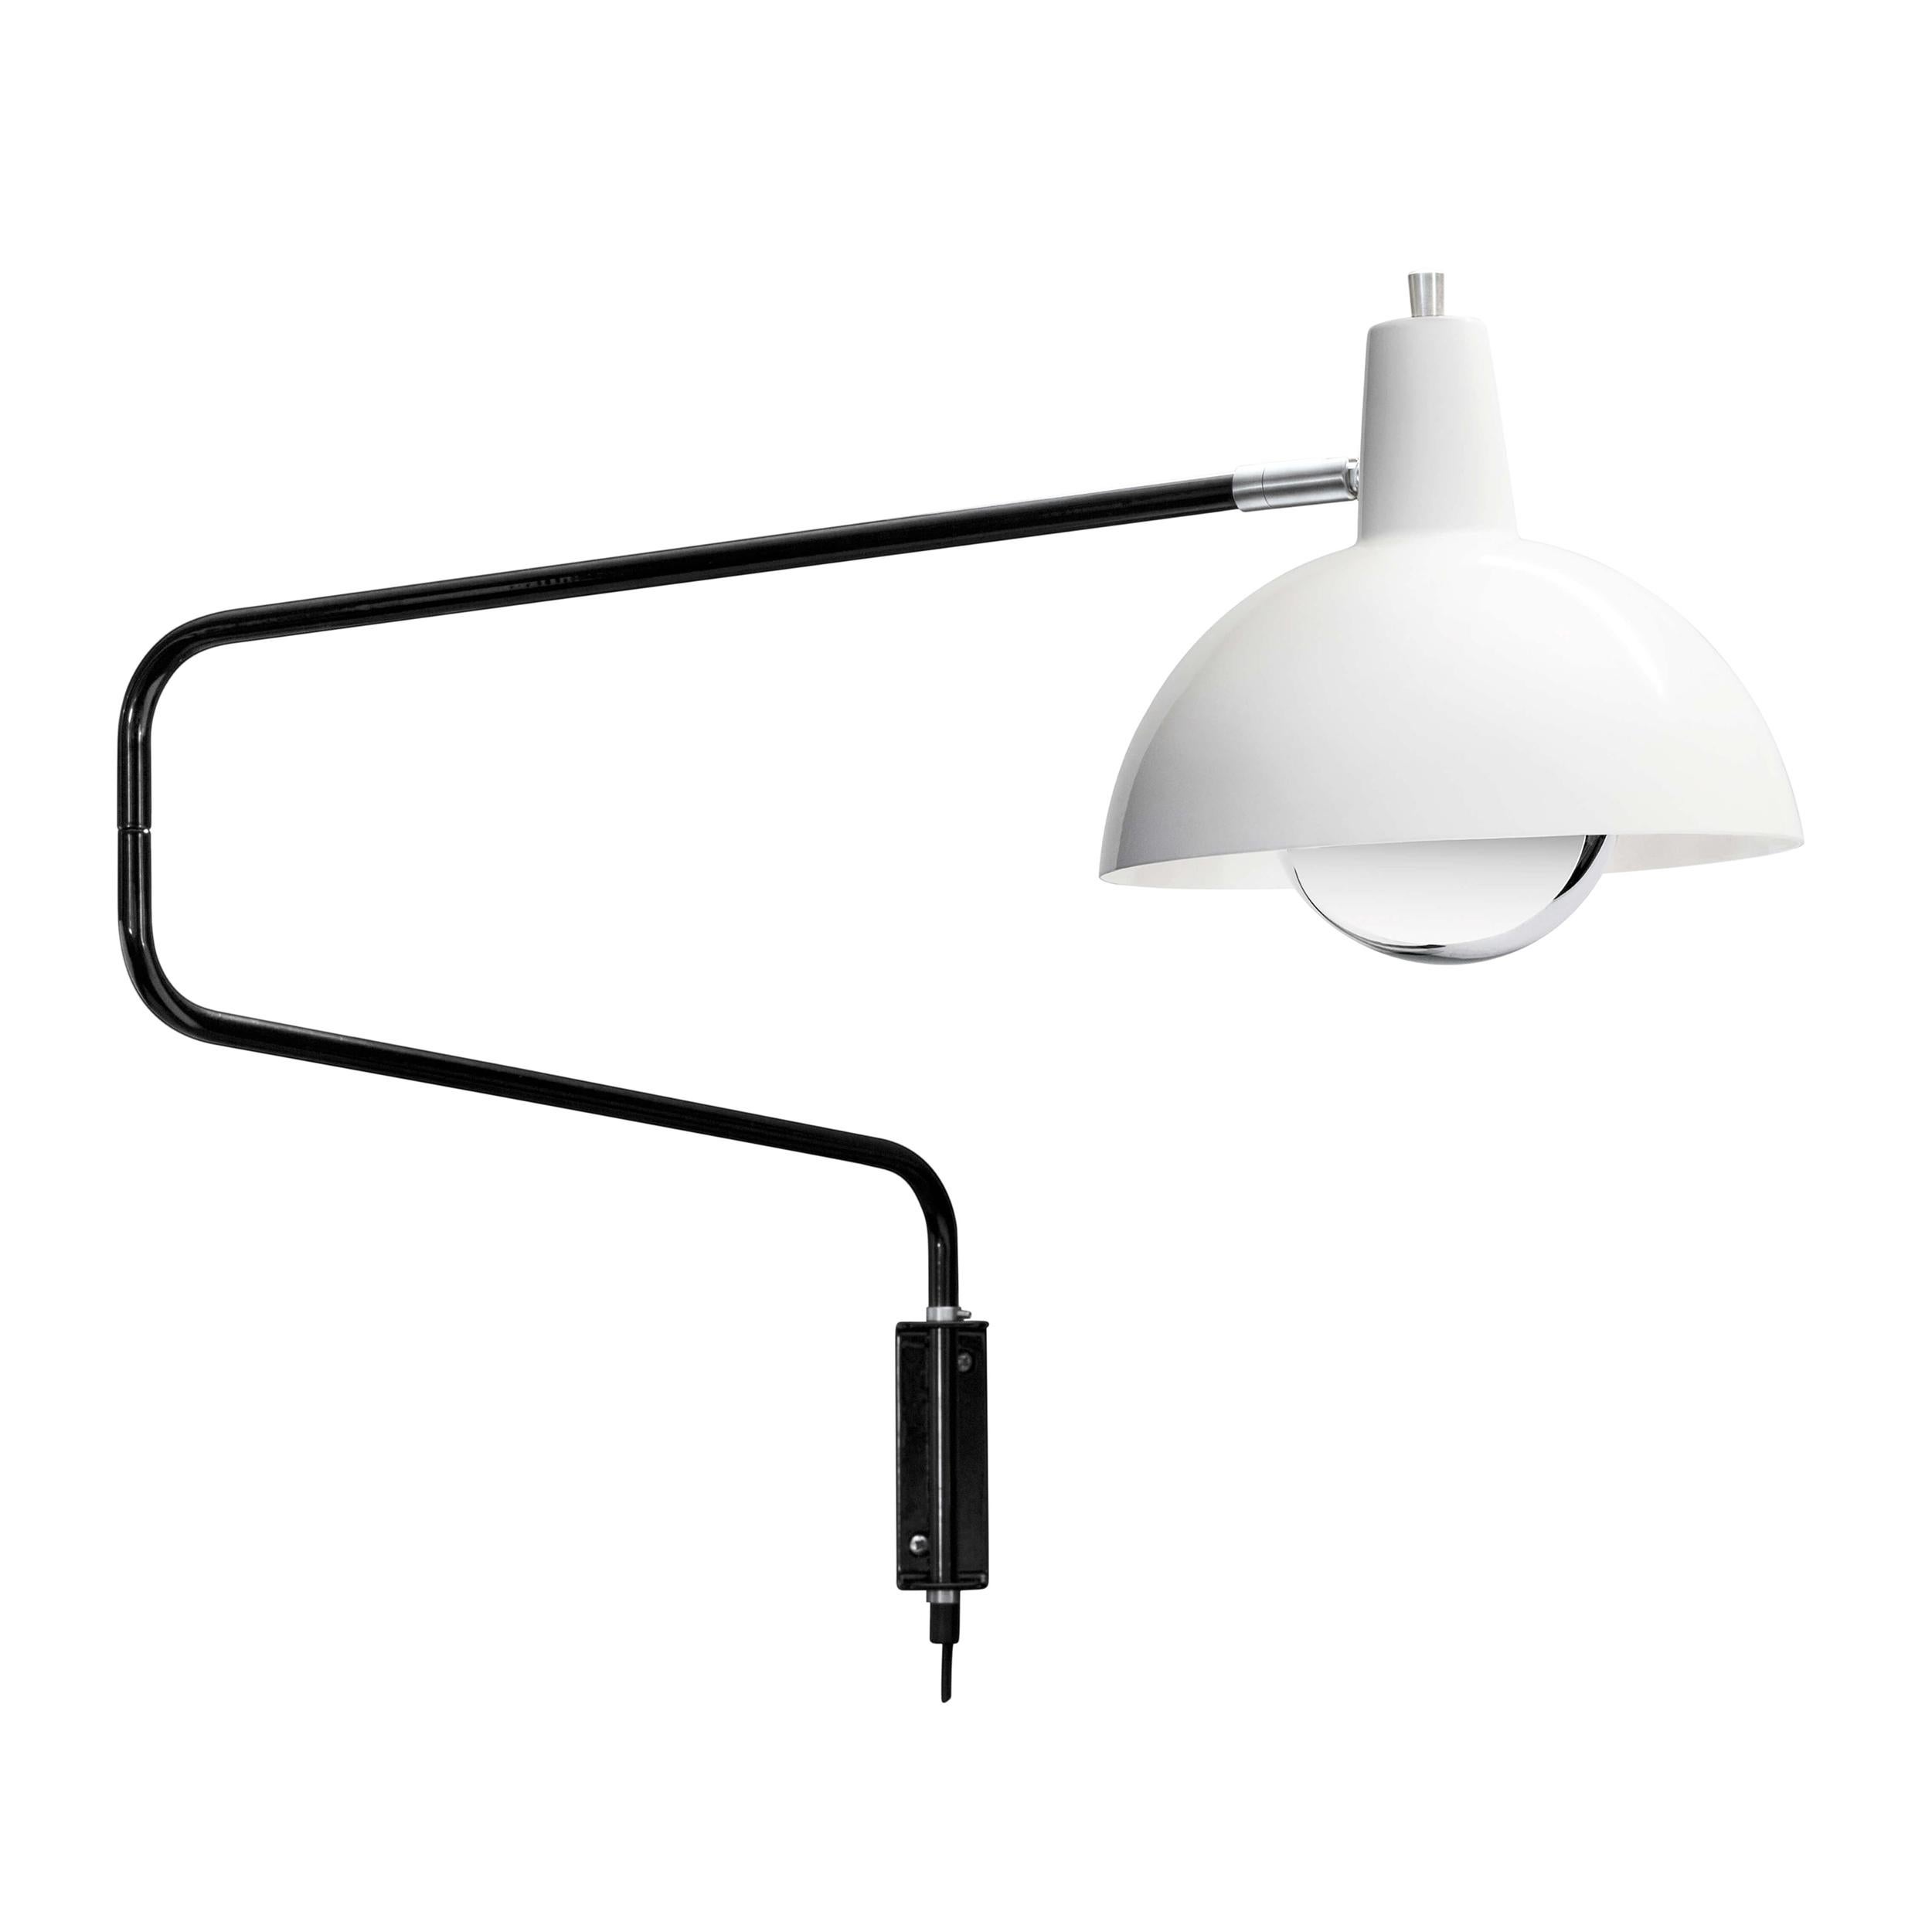 J.J.M. Hoogervorst model 1702 'Paperclip' wall light for Anvia in gray. Hoogervorst's most popular 1950s design, this lamp remains a highly sought after icon of Dutch modernism. The 'elbow' arm when folded measures 27.5 in. wide, but can be extended